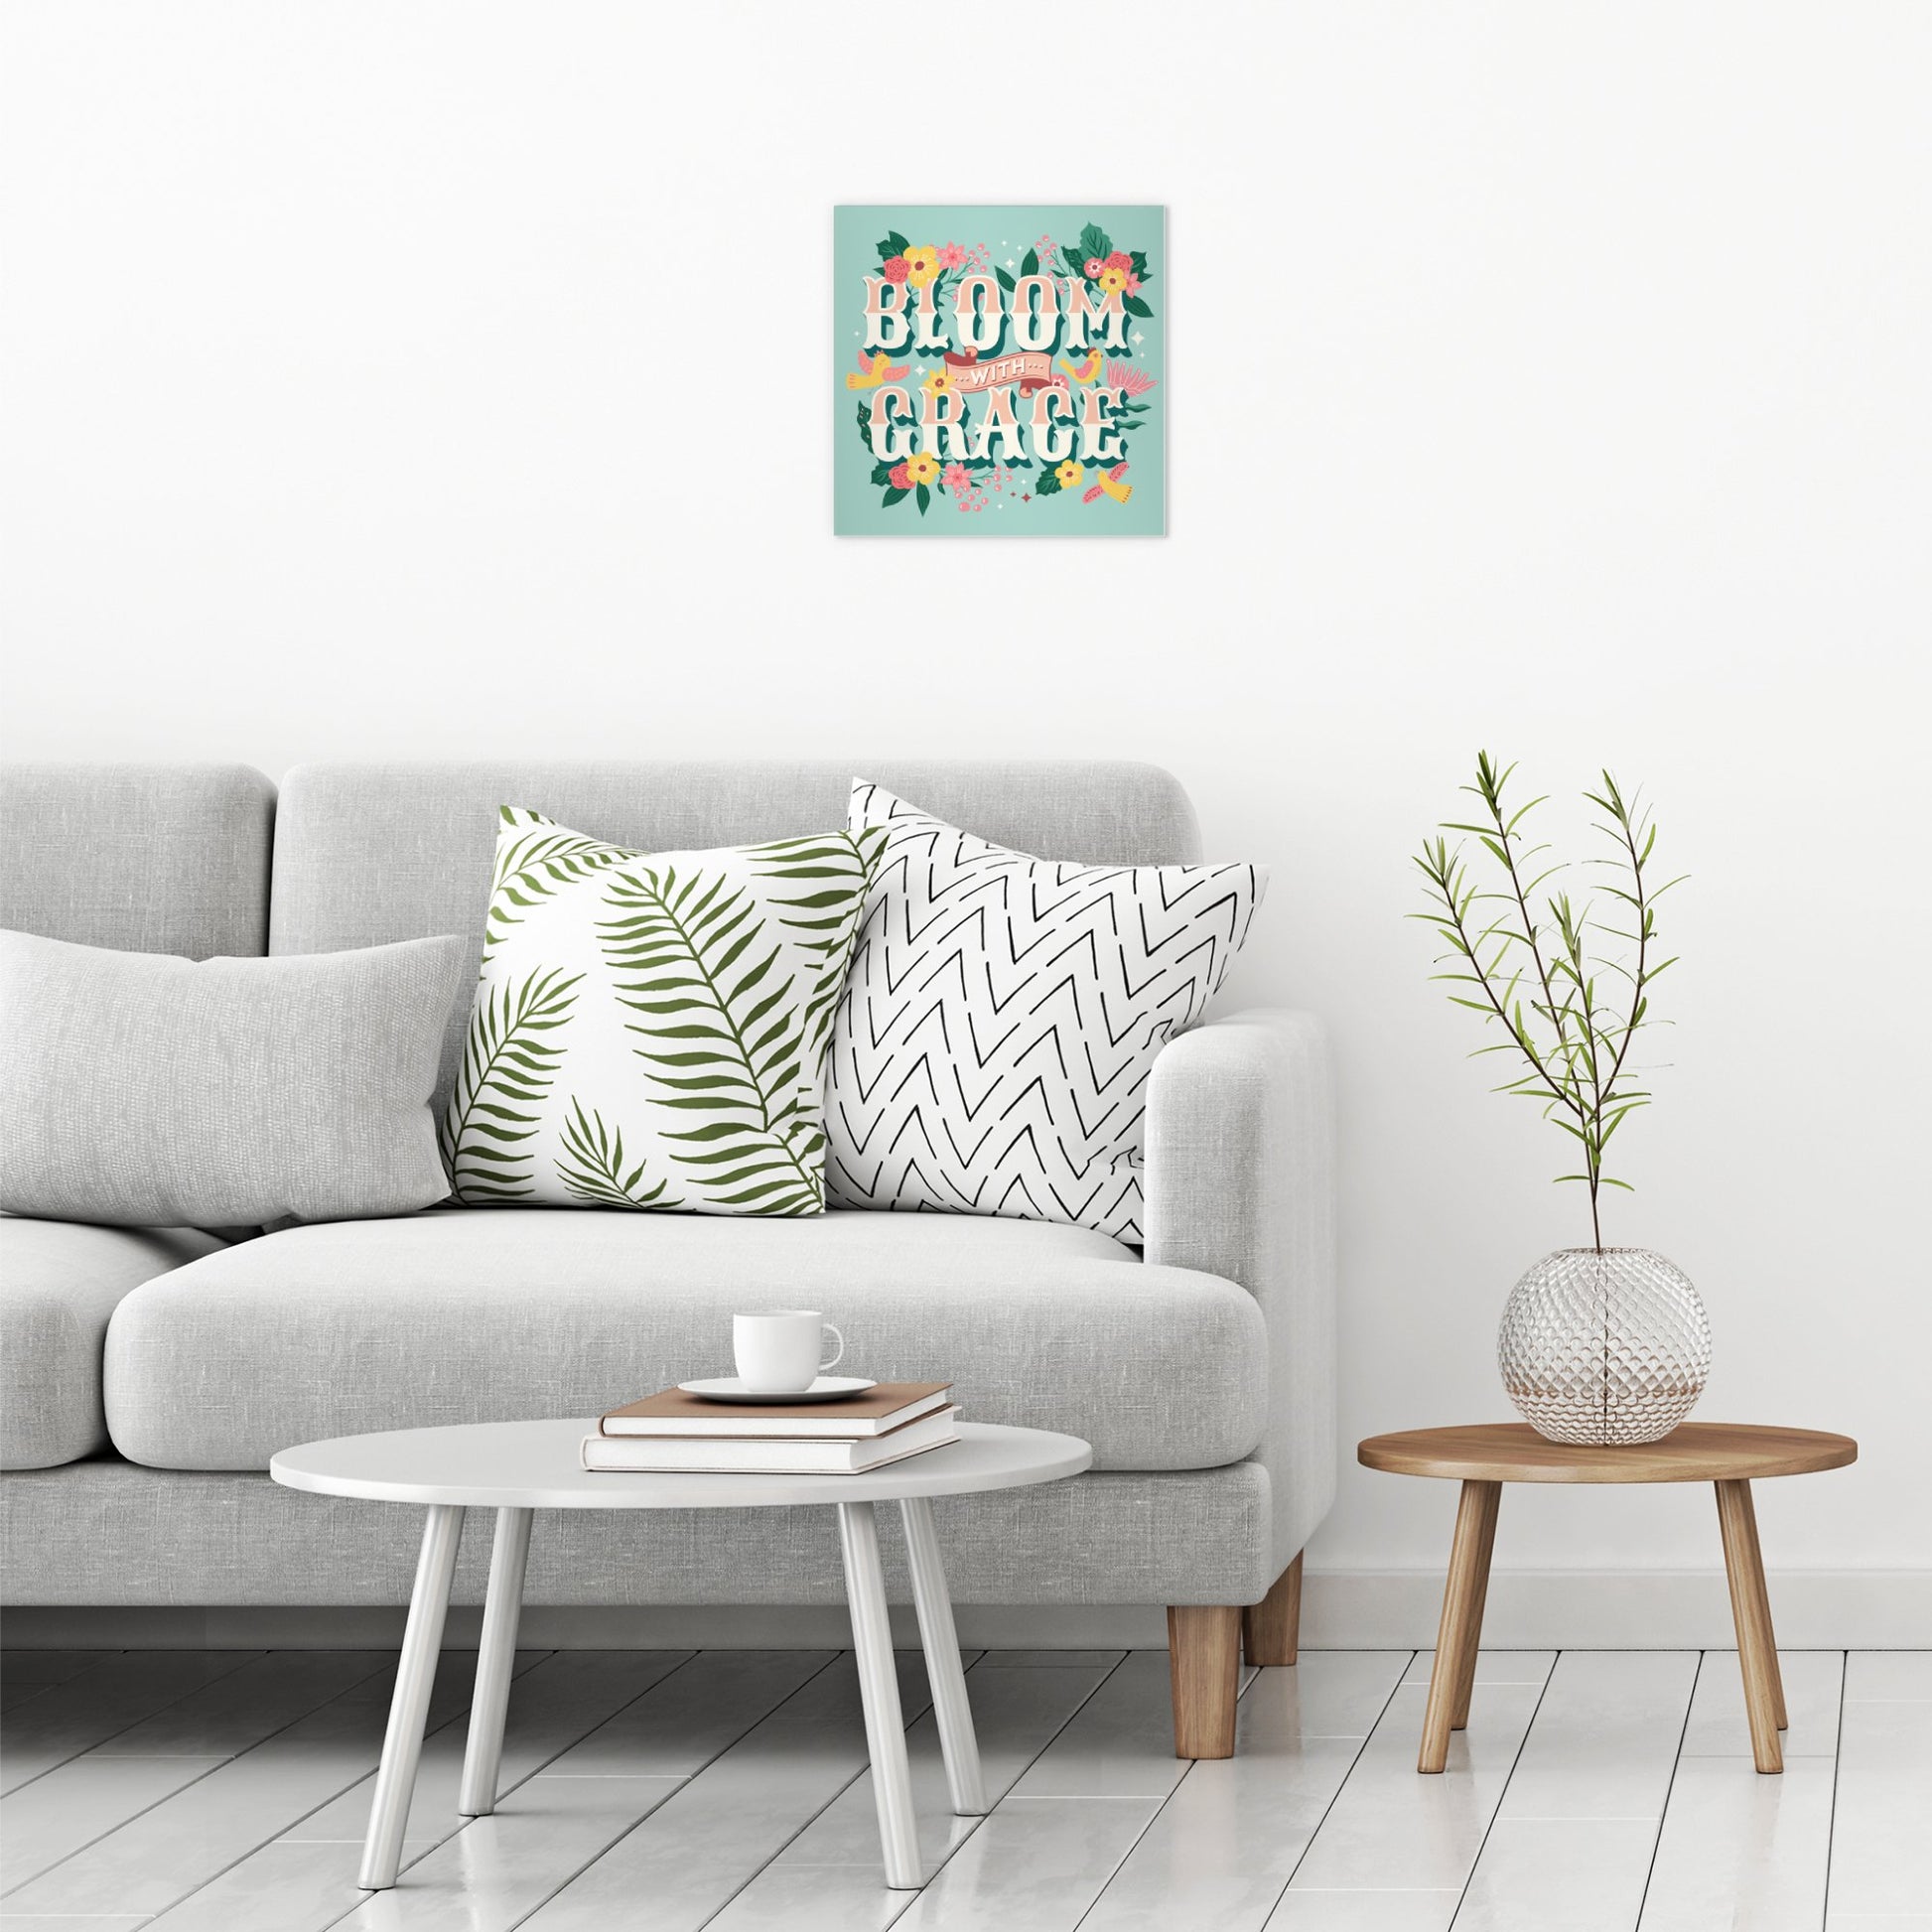 A contemporary modern room view showing a medium size metal art poster display plate with printed design of a Bloom with Grace Inspirational Quote